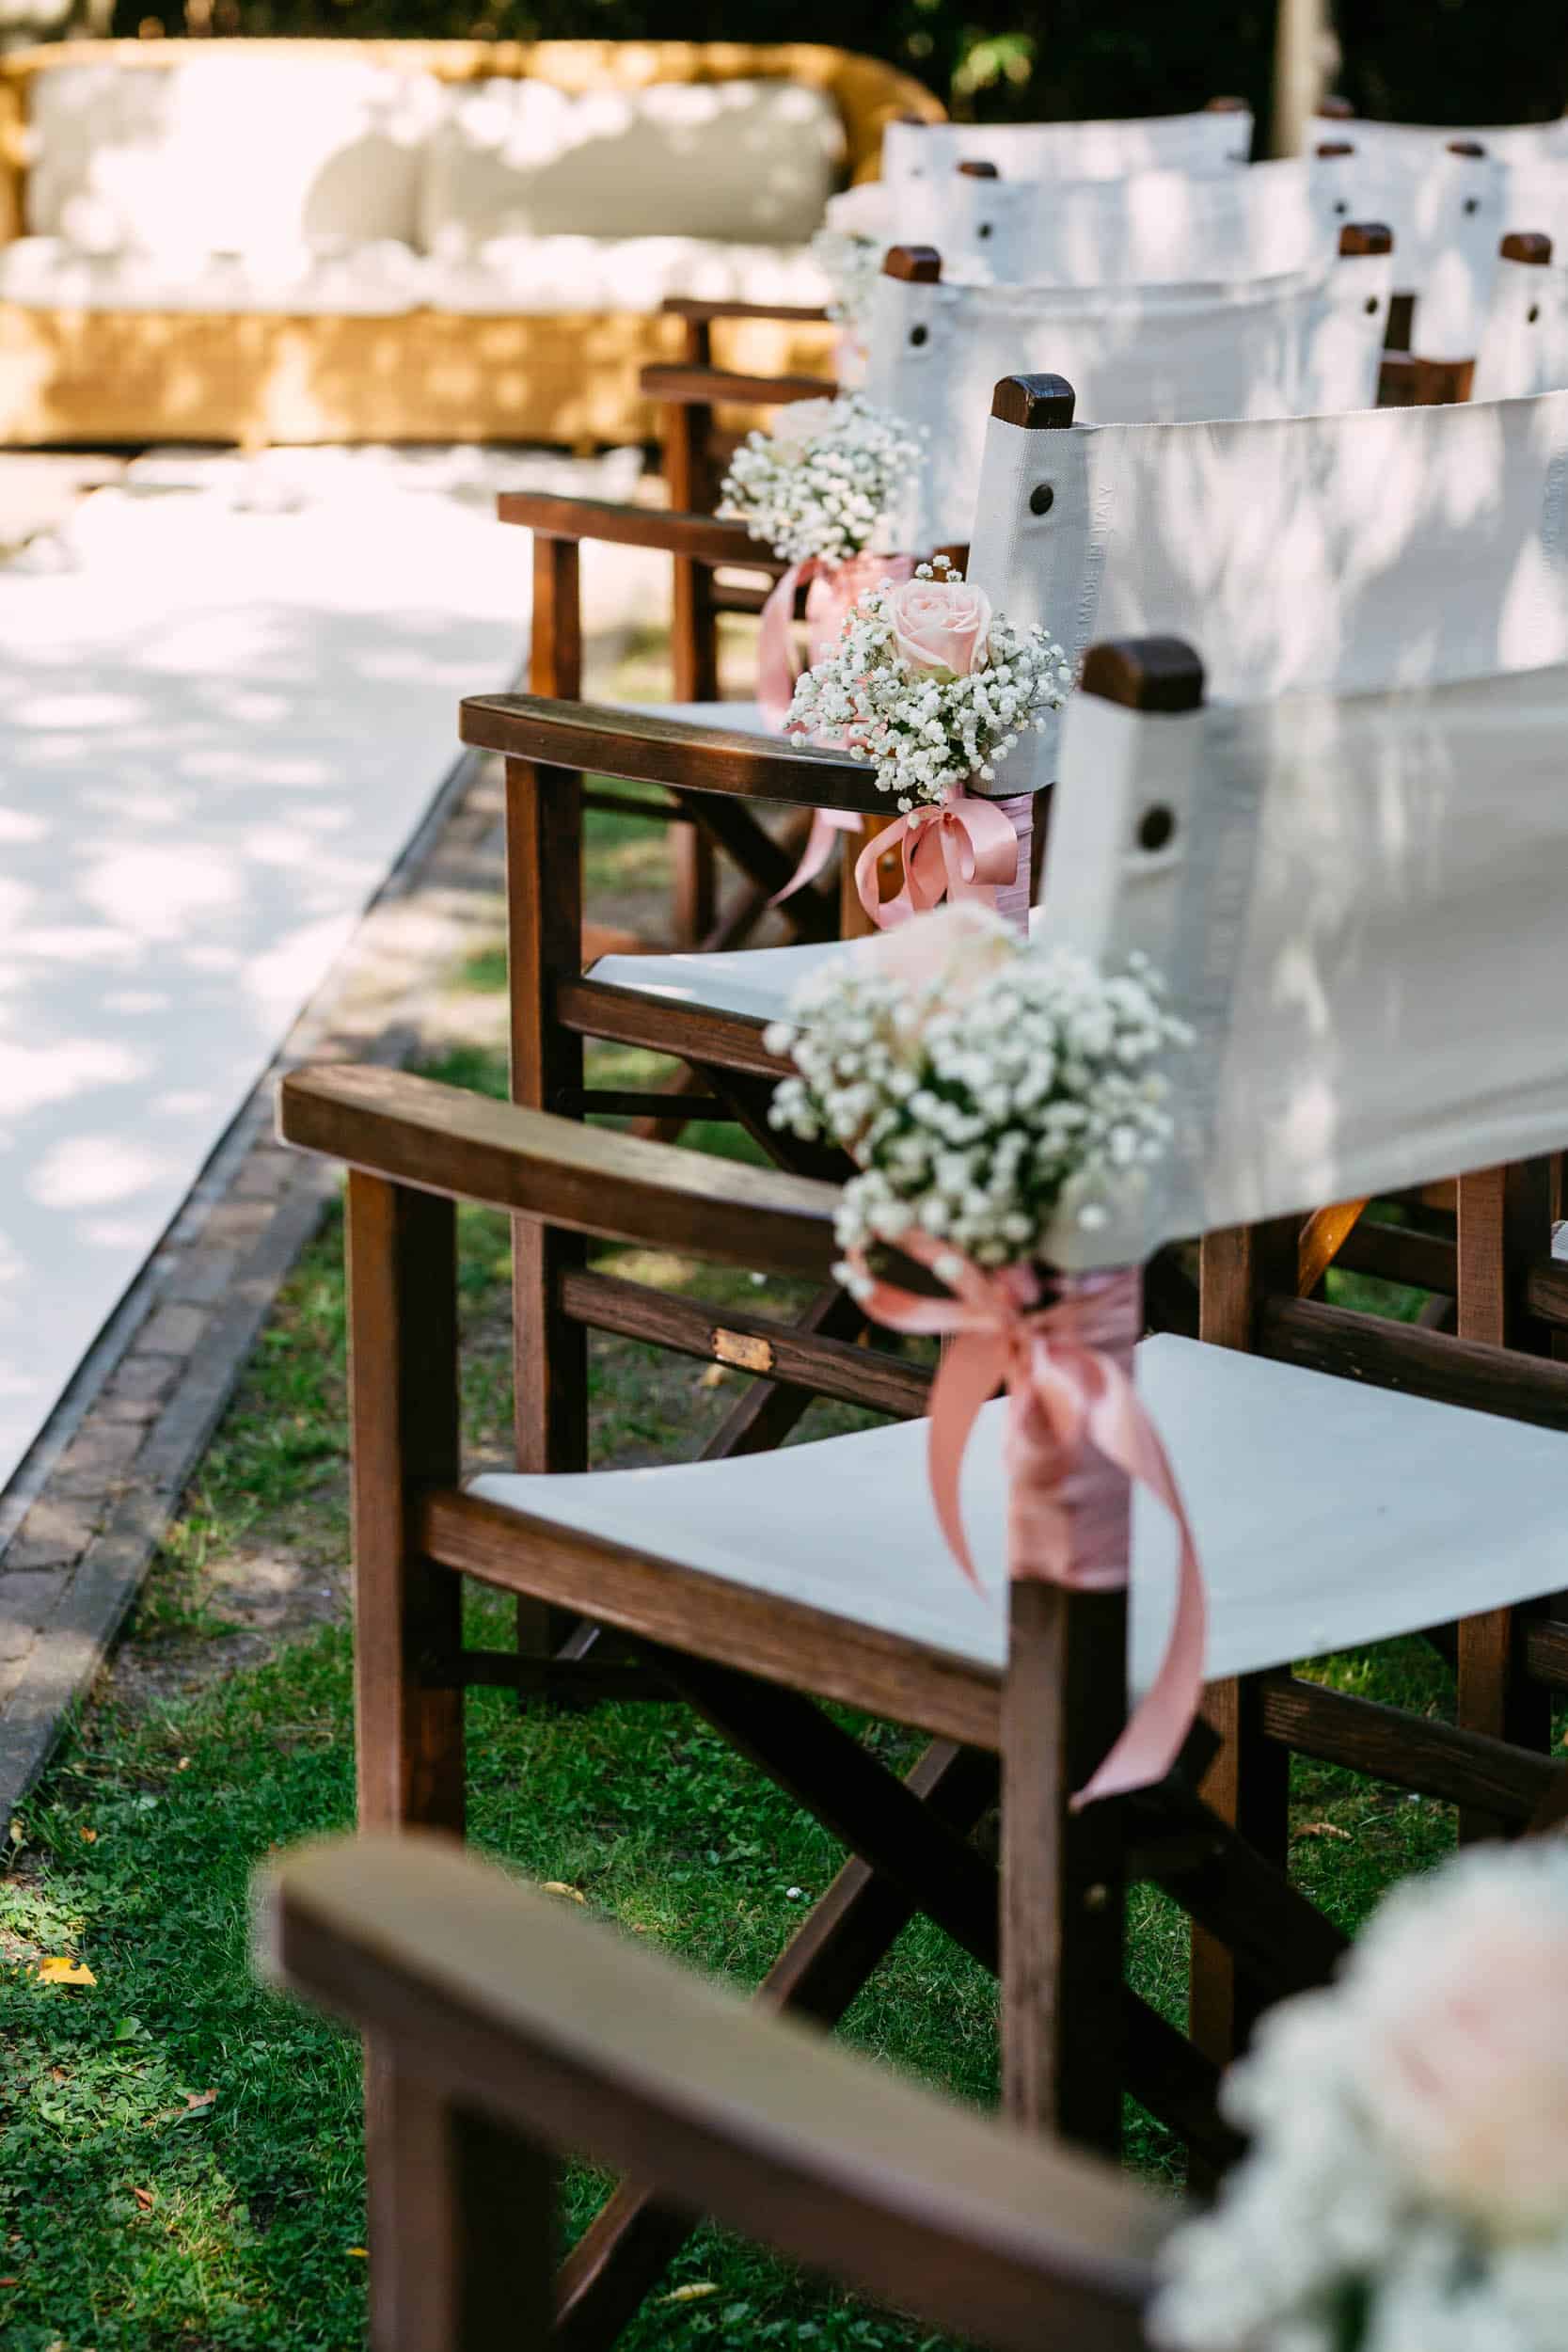 A wedding ceremony set up with white chairs and pink flowers at De Viersprong S Gravenzande.